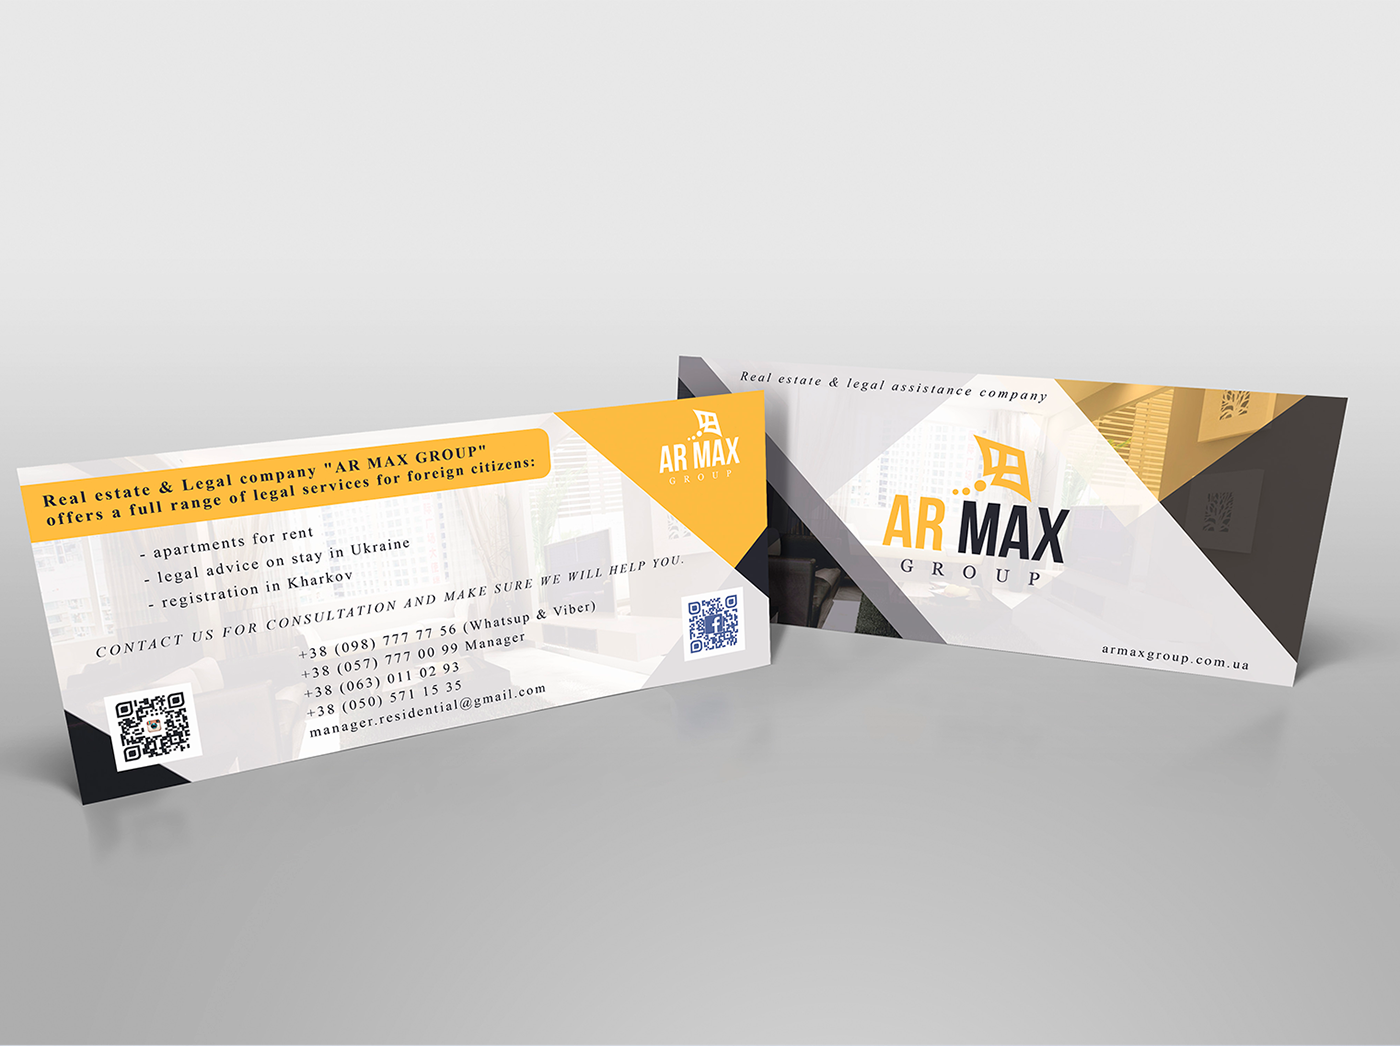 logo business card company services real estate legal assistance brending kharkov flyer yellow card black